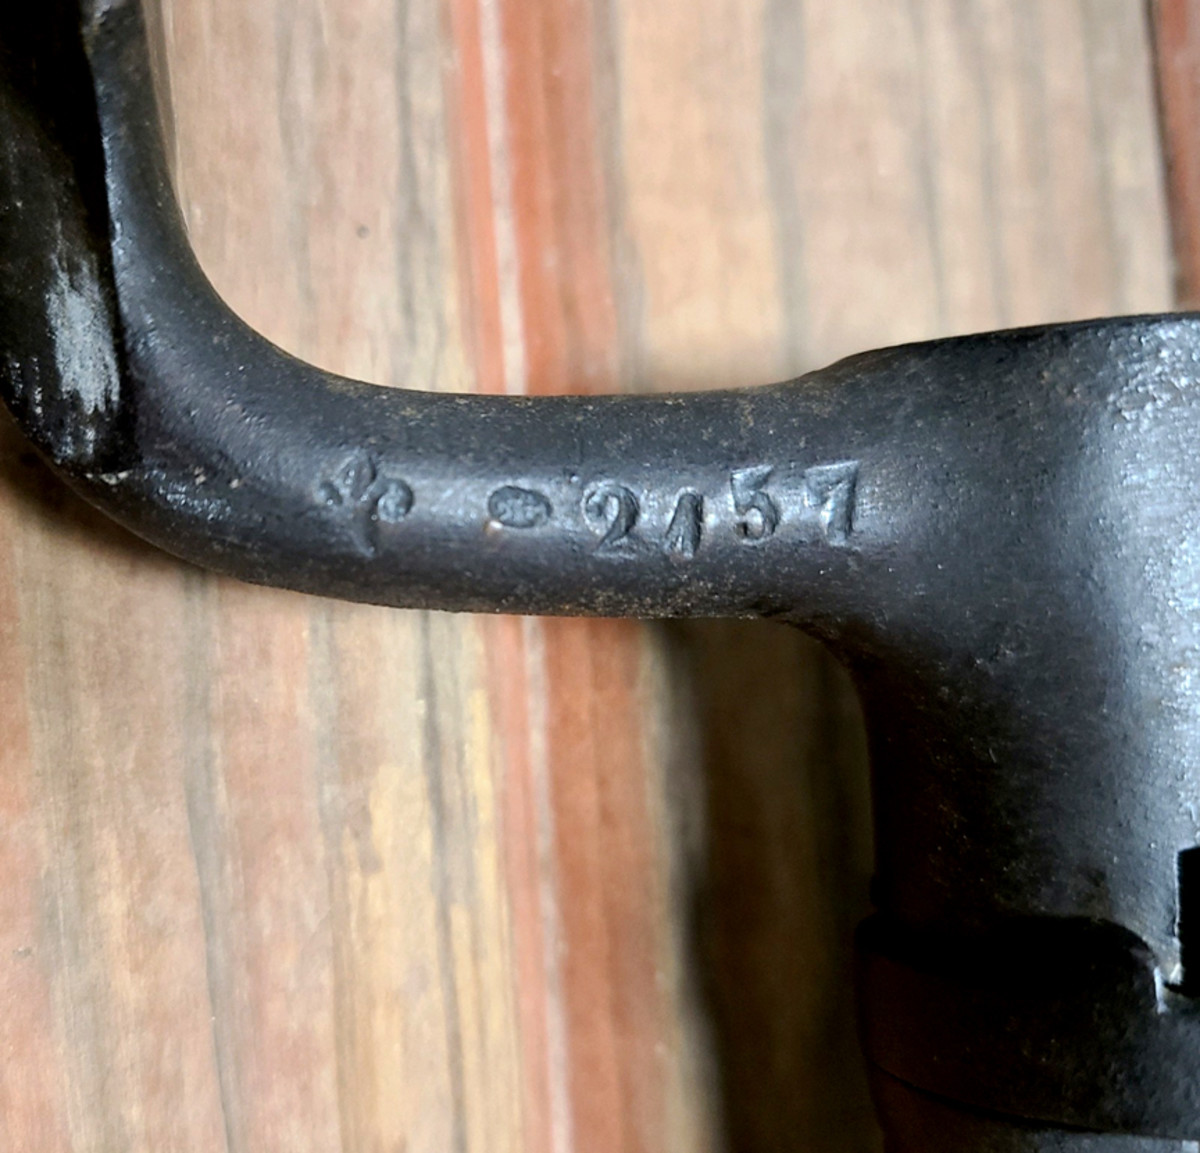 A fleur-de-lis arsenal stamp is found on the shank of the socket-style bayonet.